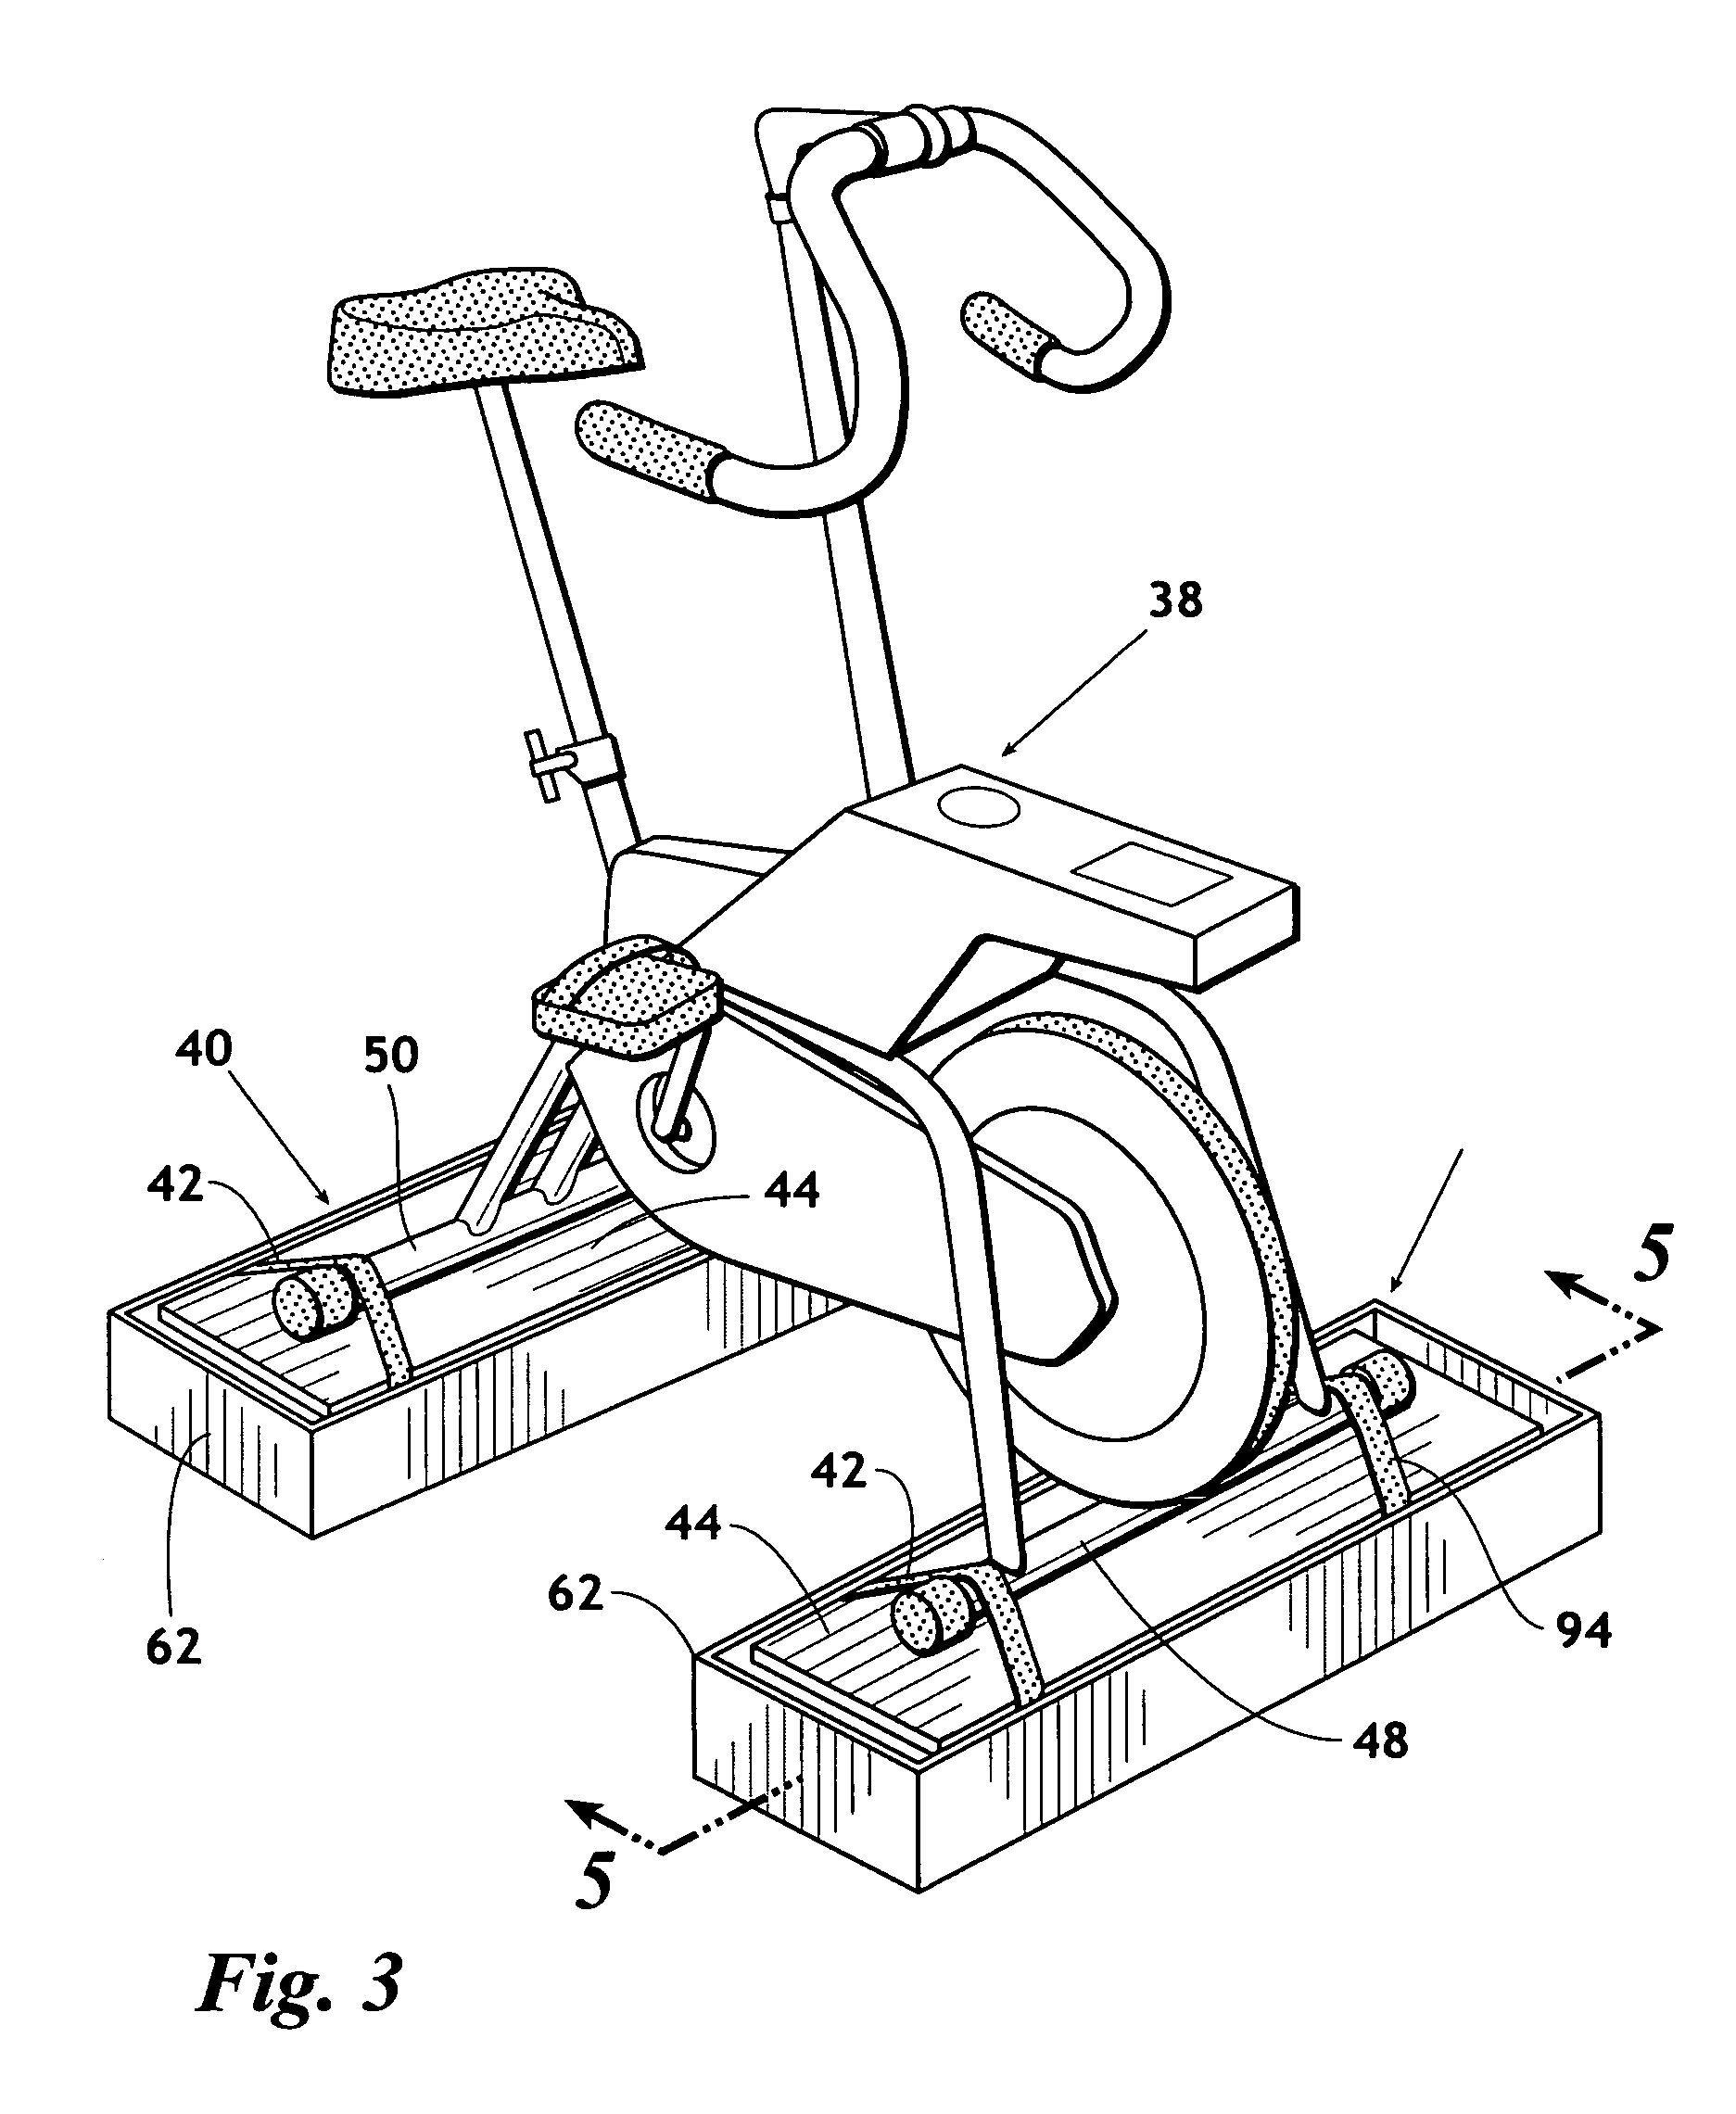 Dynamic system for a stationary bicycle